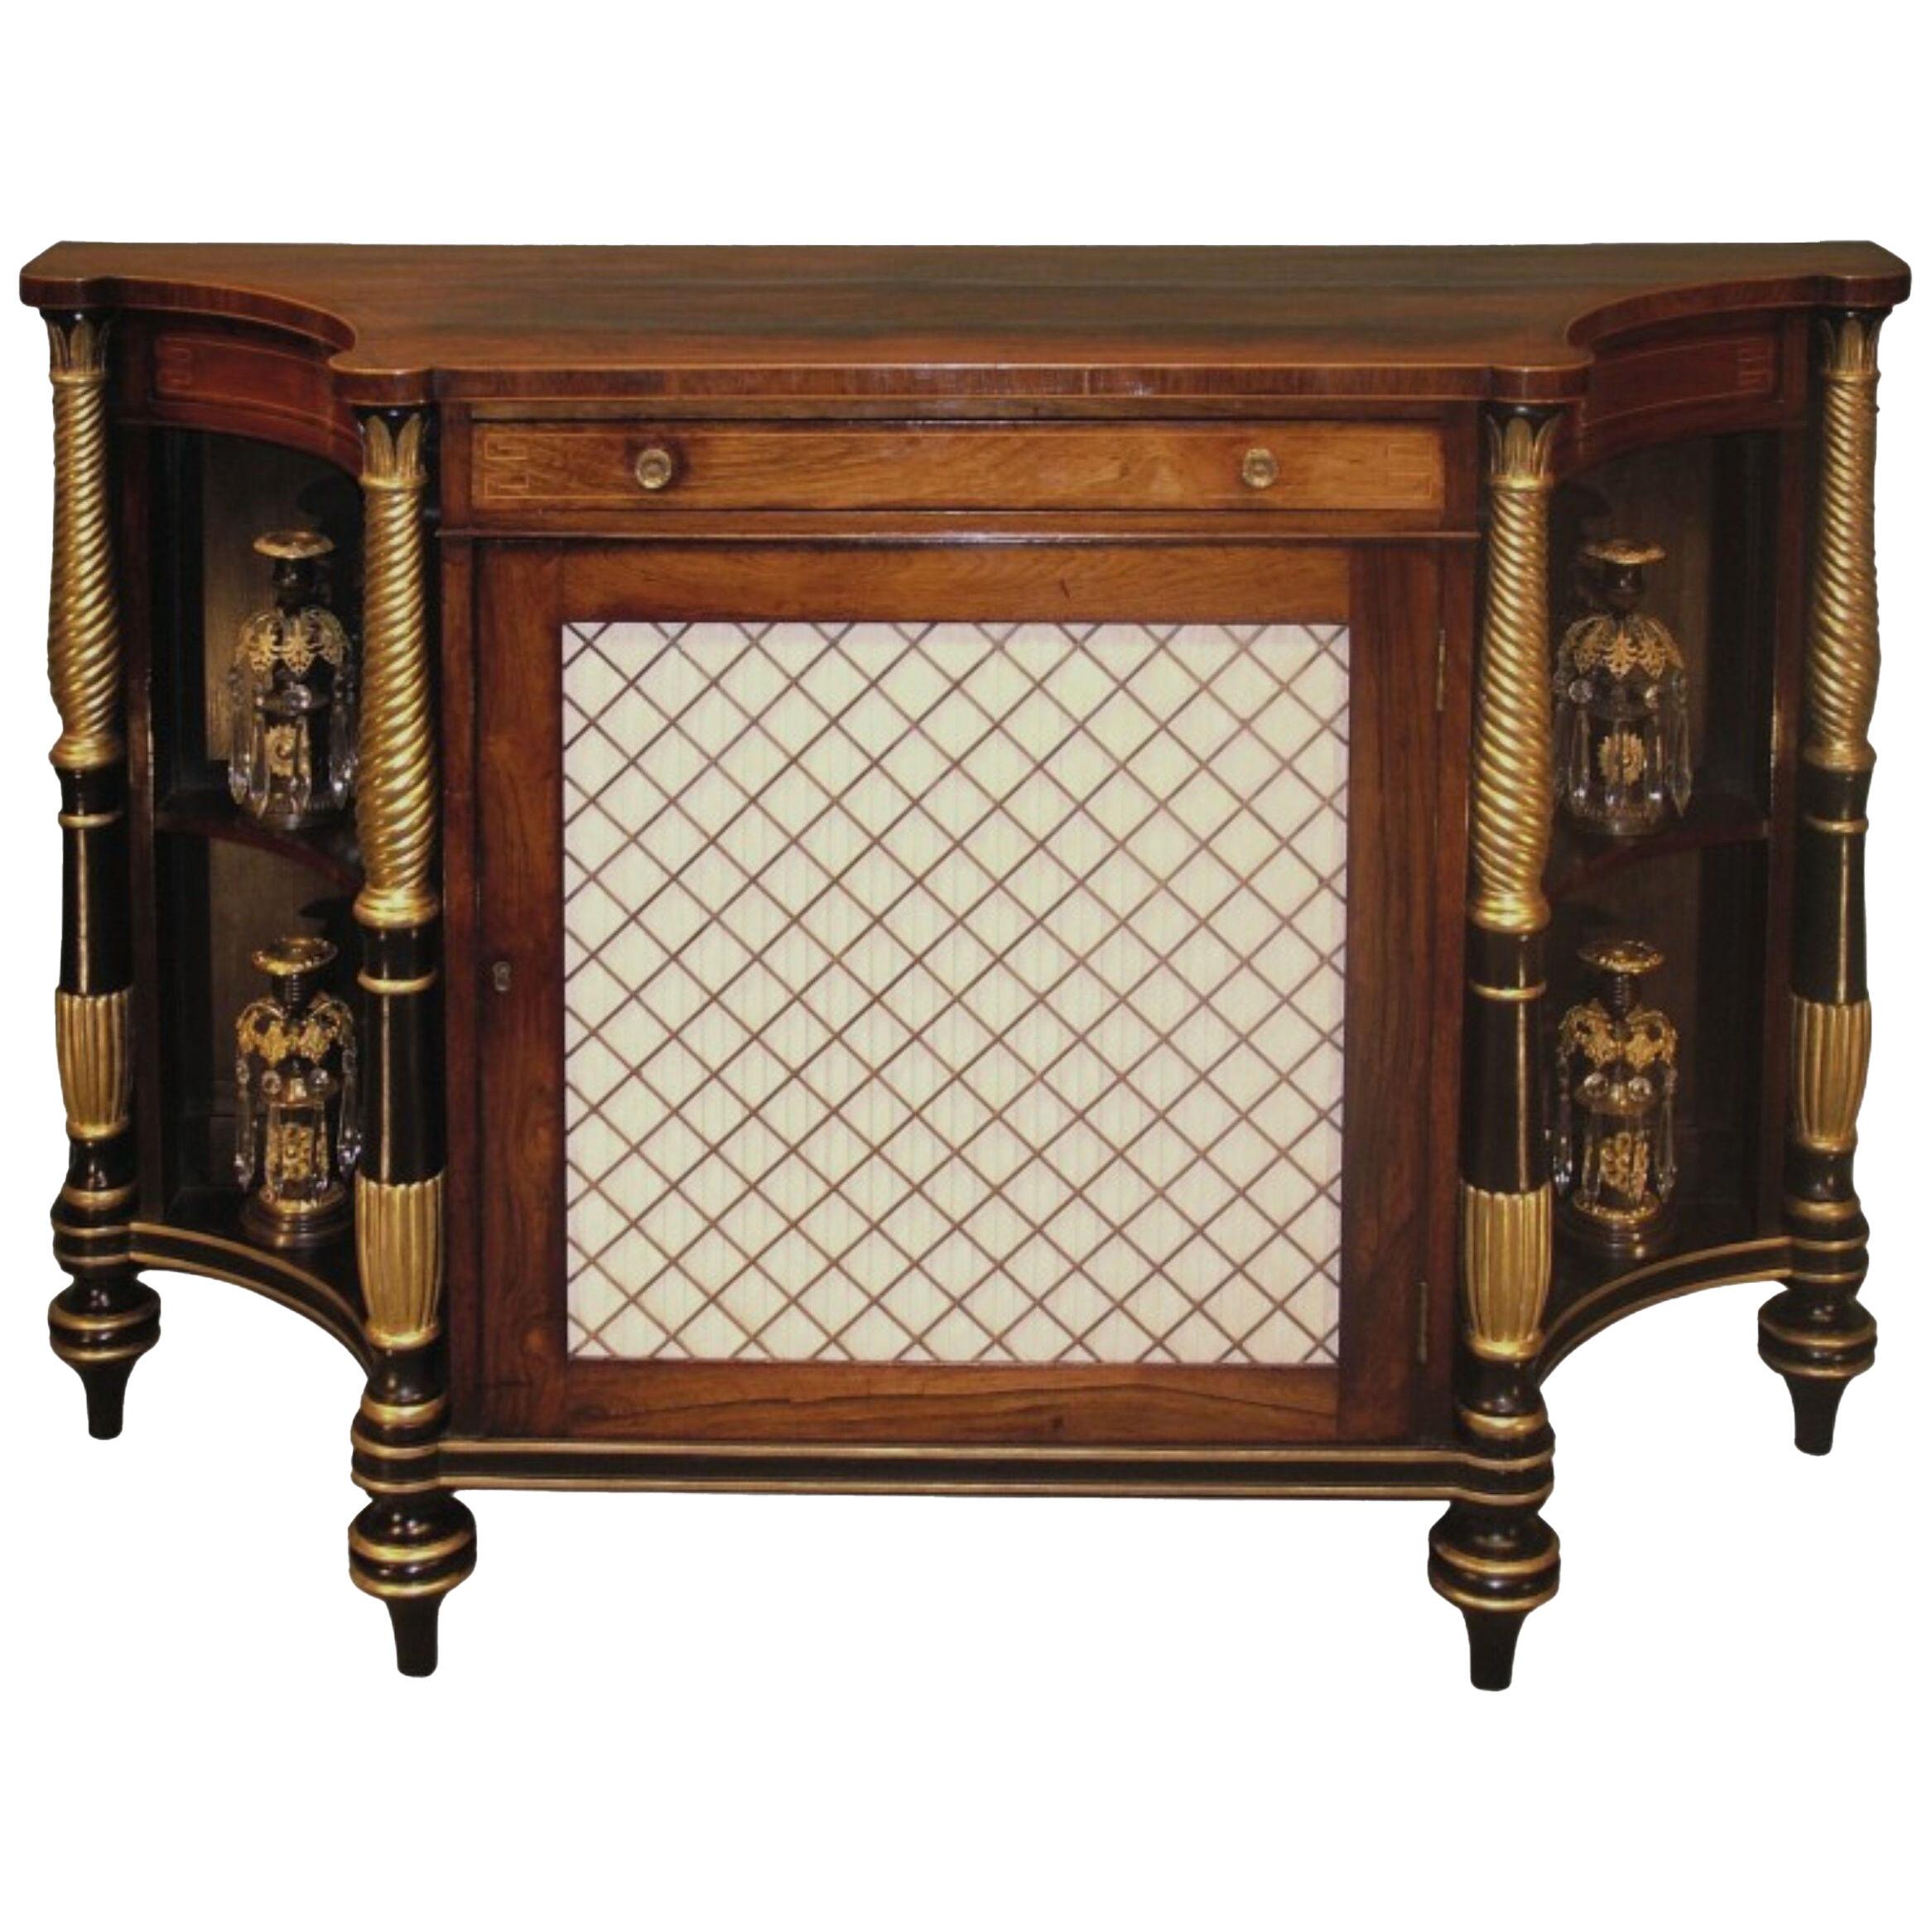 A Regency period rosewood, giltwood and black painted Chiffonier.